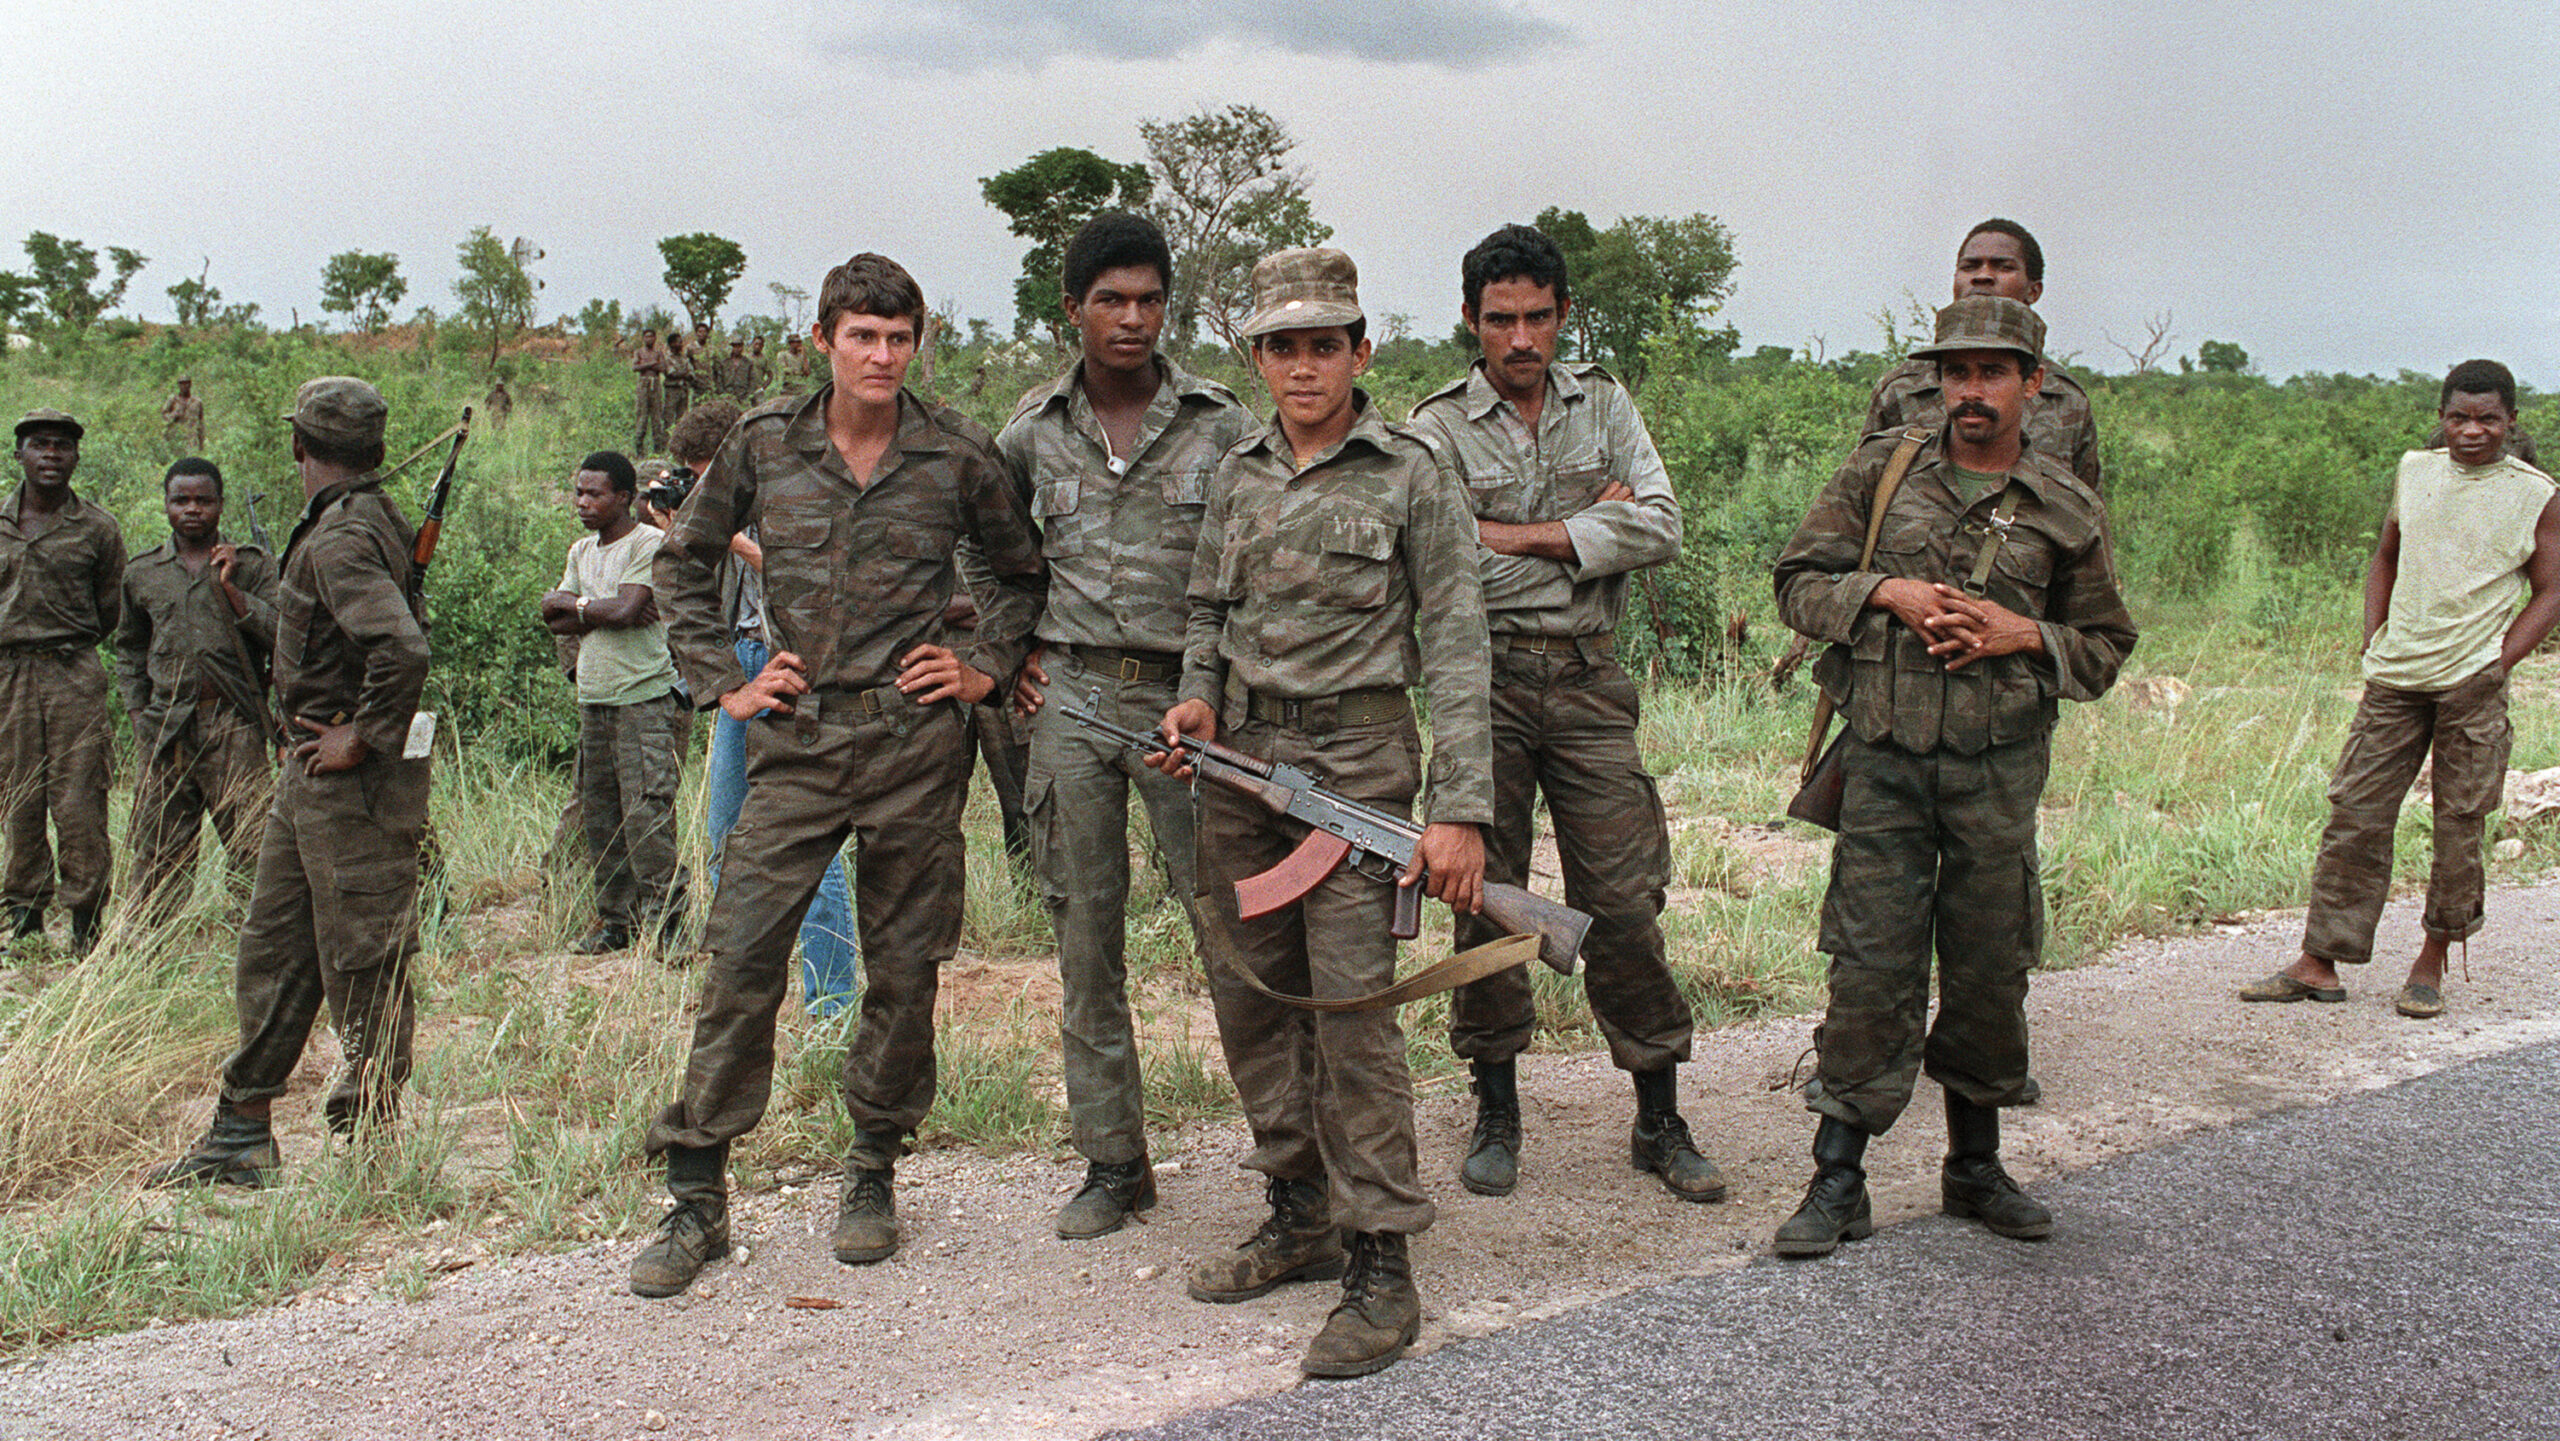 Cuban soldiers pose with Soviet-backed Popular Movement for the Liberation of Angola soldiers near Cuito Cuanavale. The struggle between pro-Western and pro-Soviet military factions in Angola was a major front in the Cold War, resulting in the participation of 40,000 Cuban troops.